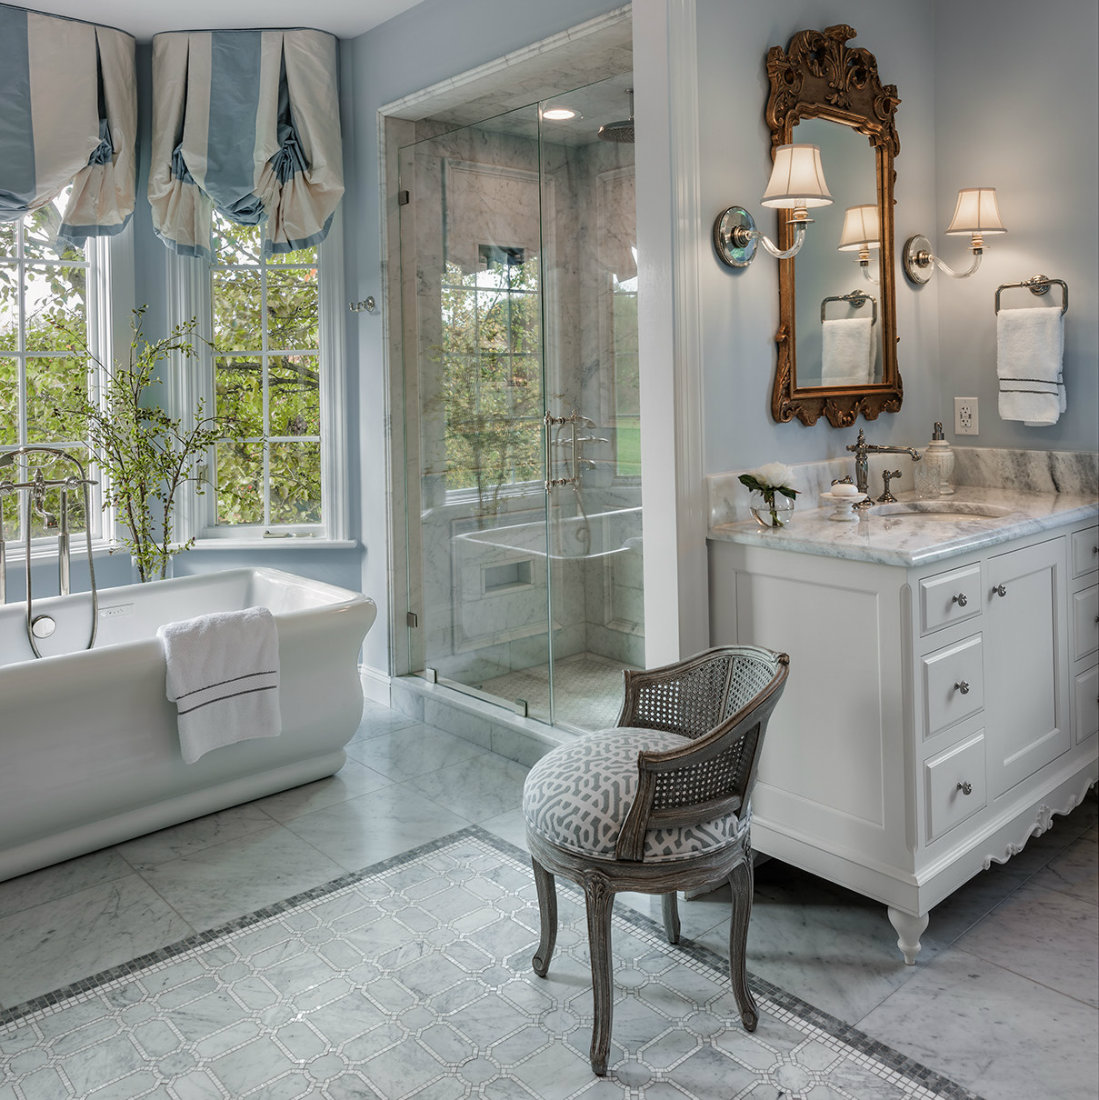 Renovating a Master Bathroom: Five Things to Consider